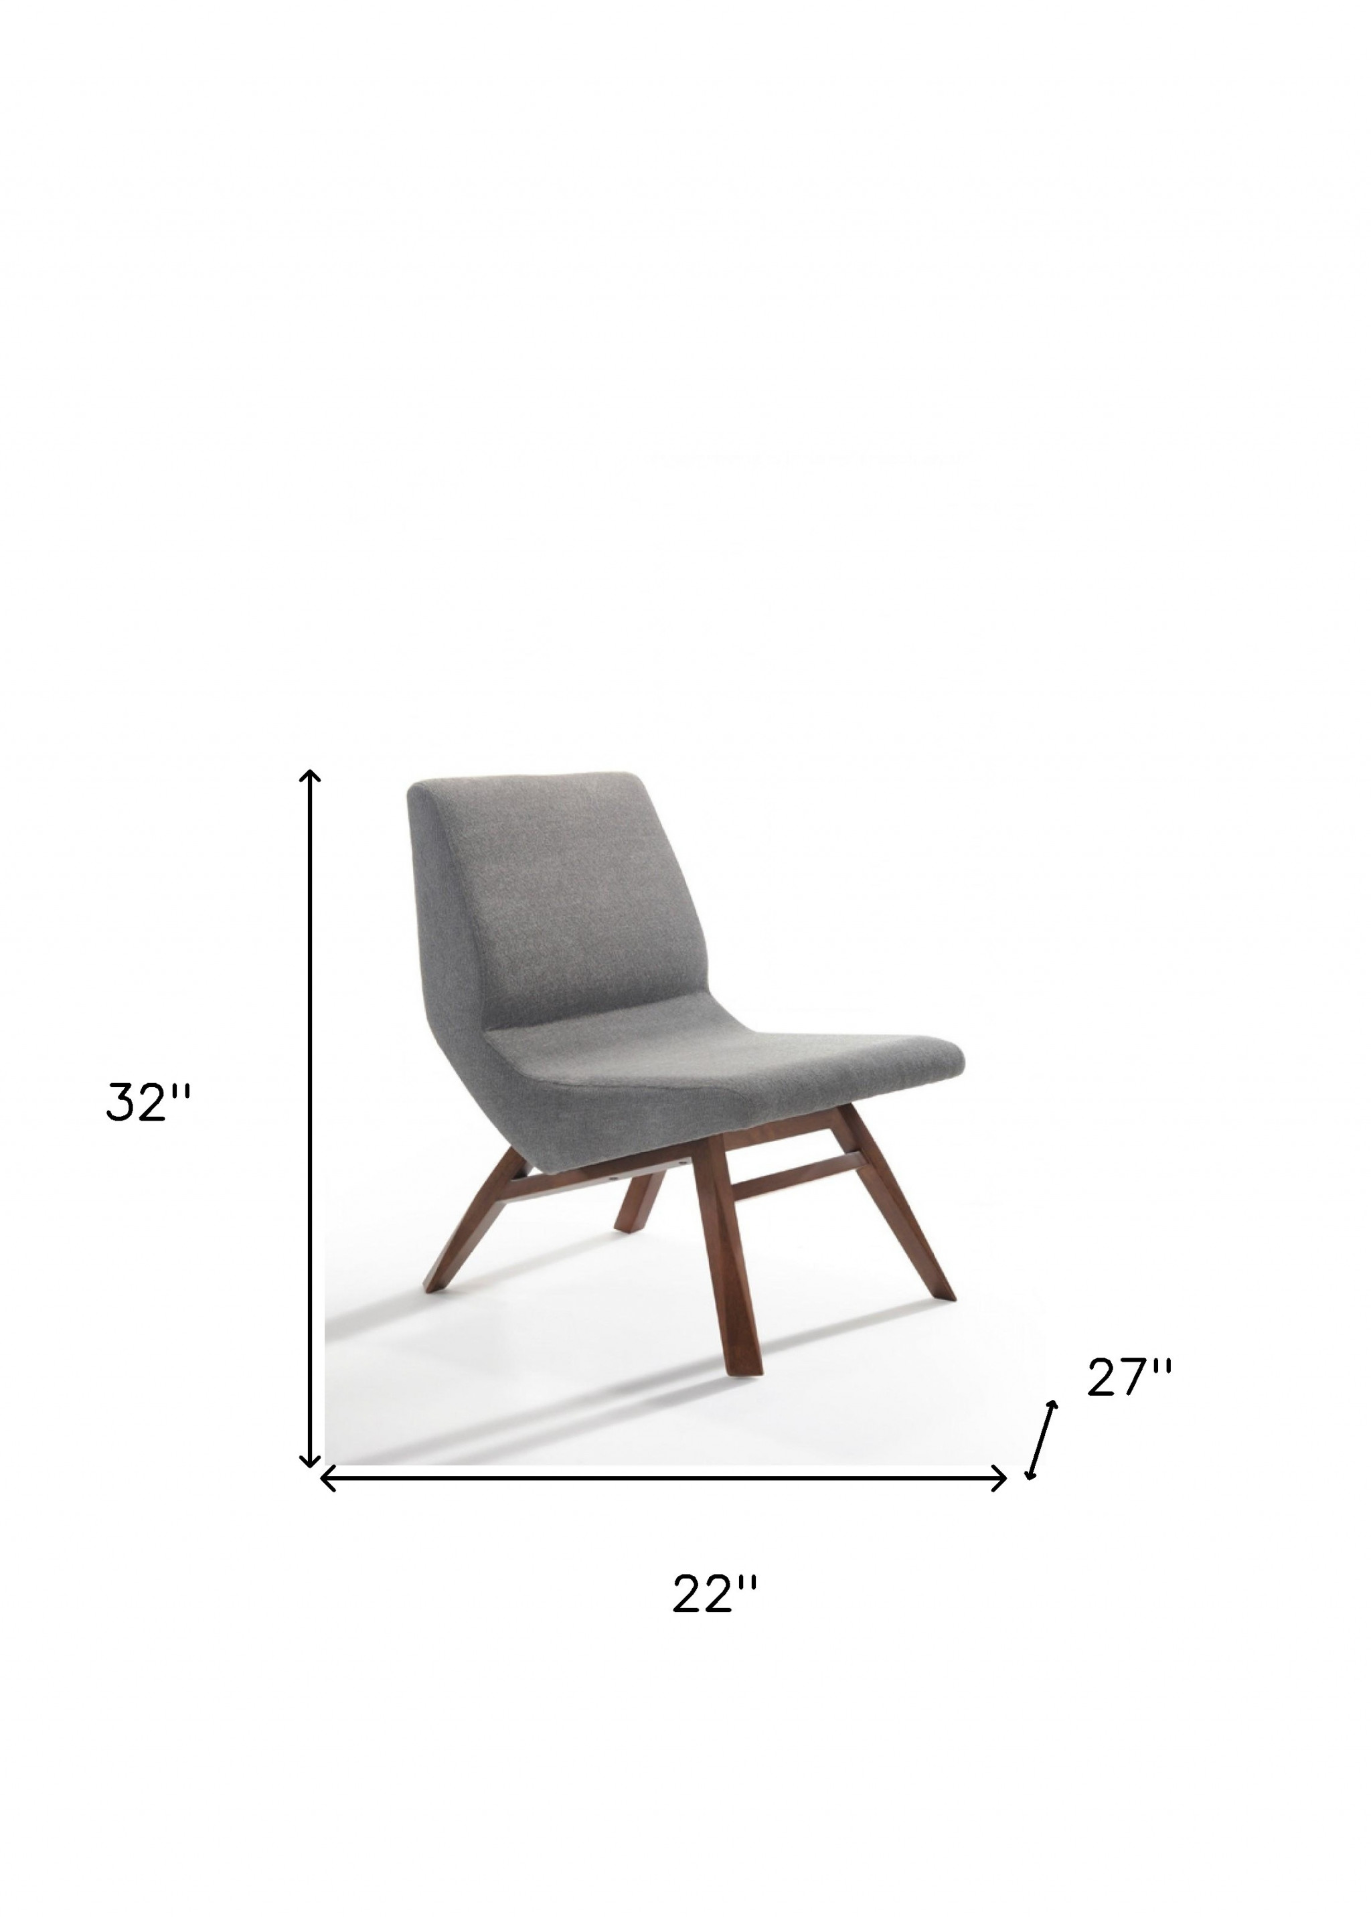 "22"" Grey And Walnut Solid Color Lounge Chair With Ottoman"